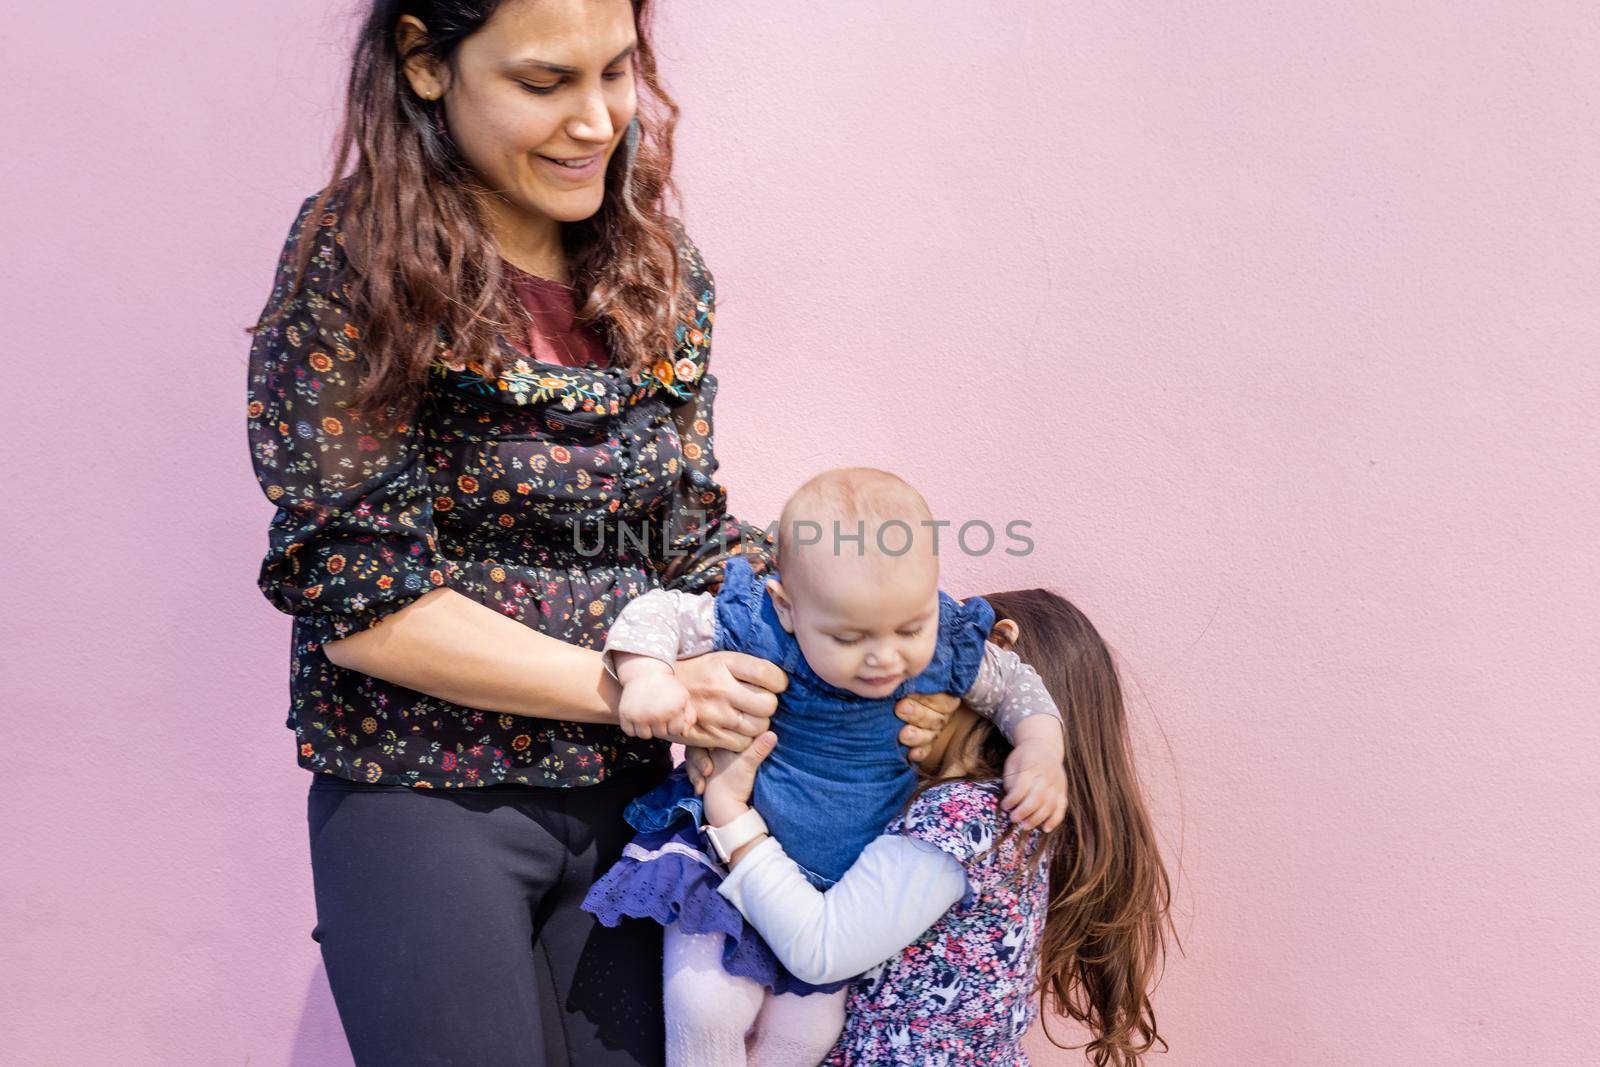 Portrait of woman helping little girl to hold cute smiling baby with pink wall as background. Adorable view of baby in arms of her older sister and mother. Happy family outdoors